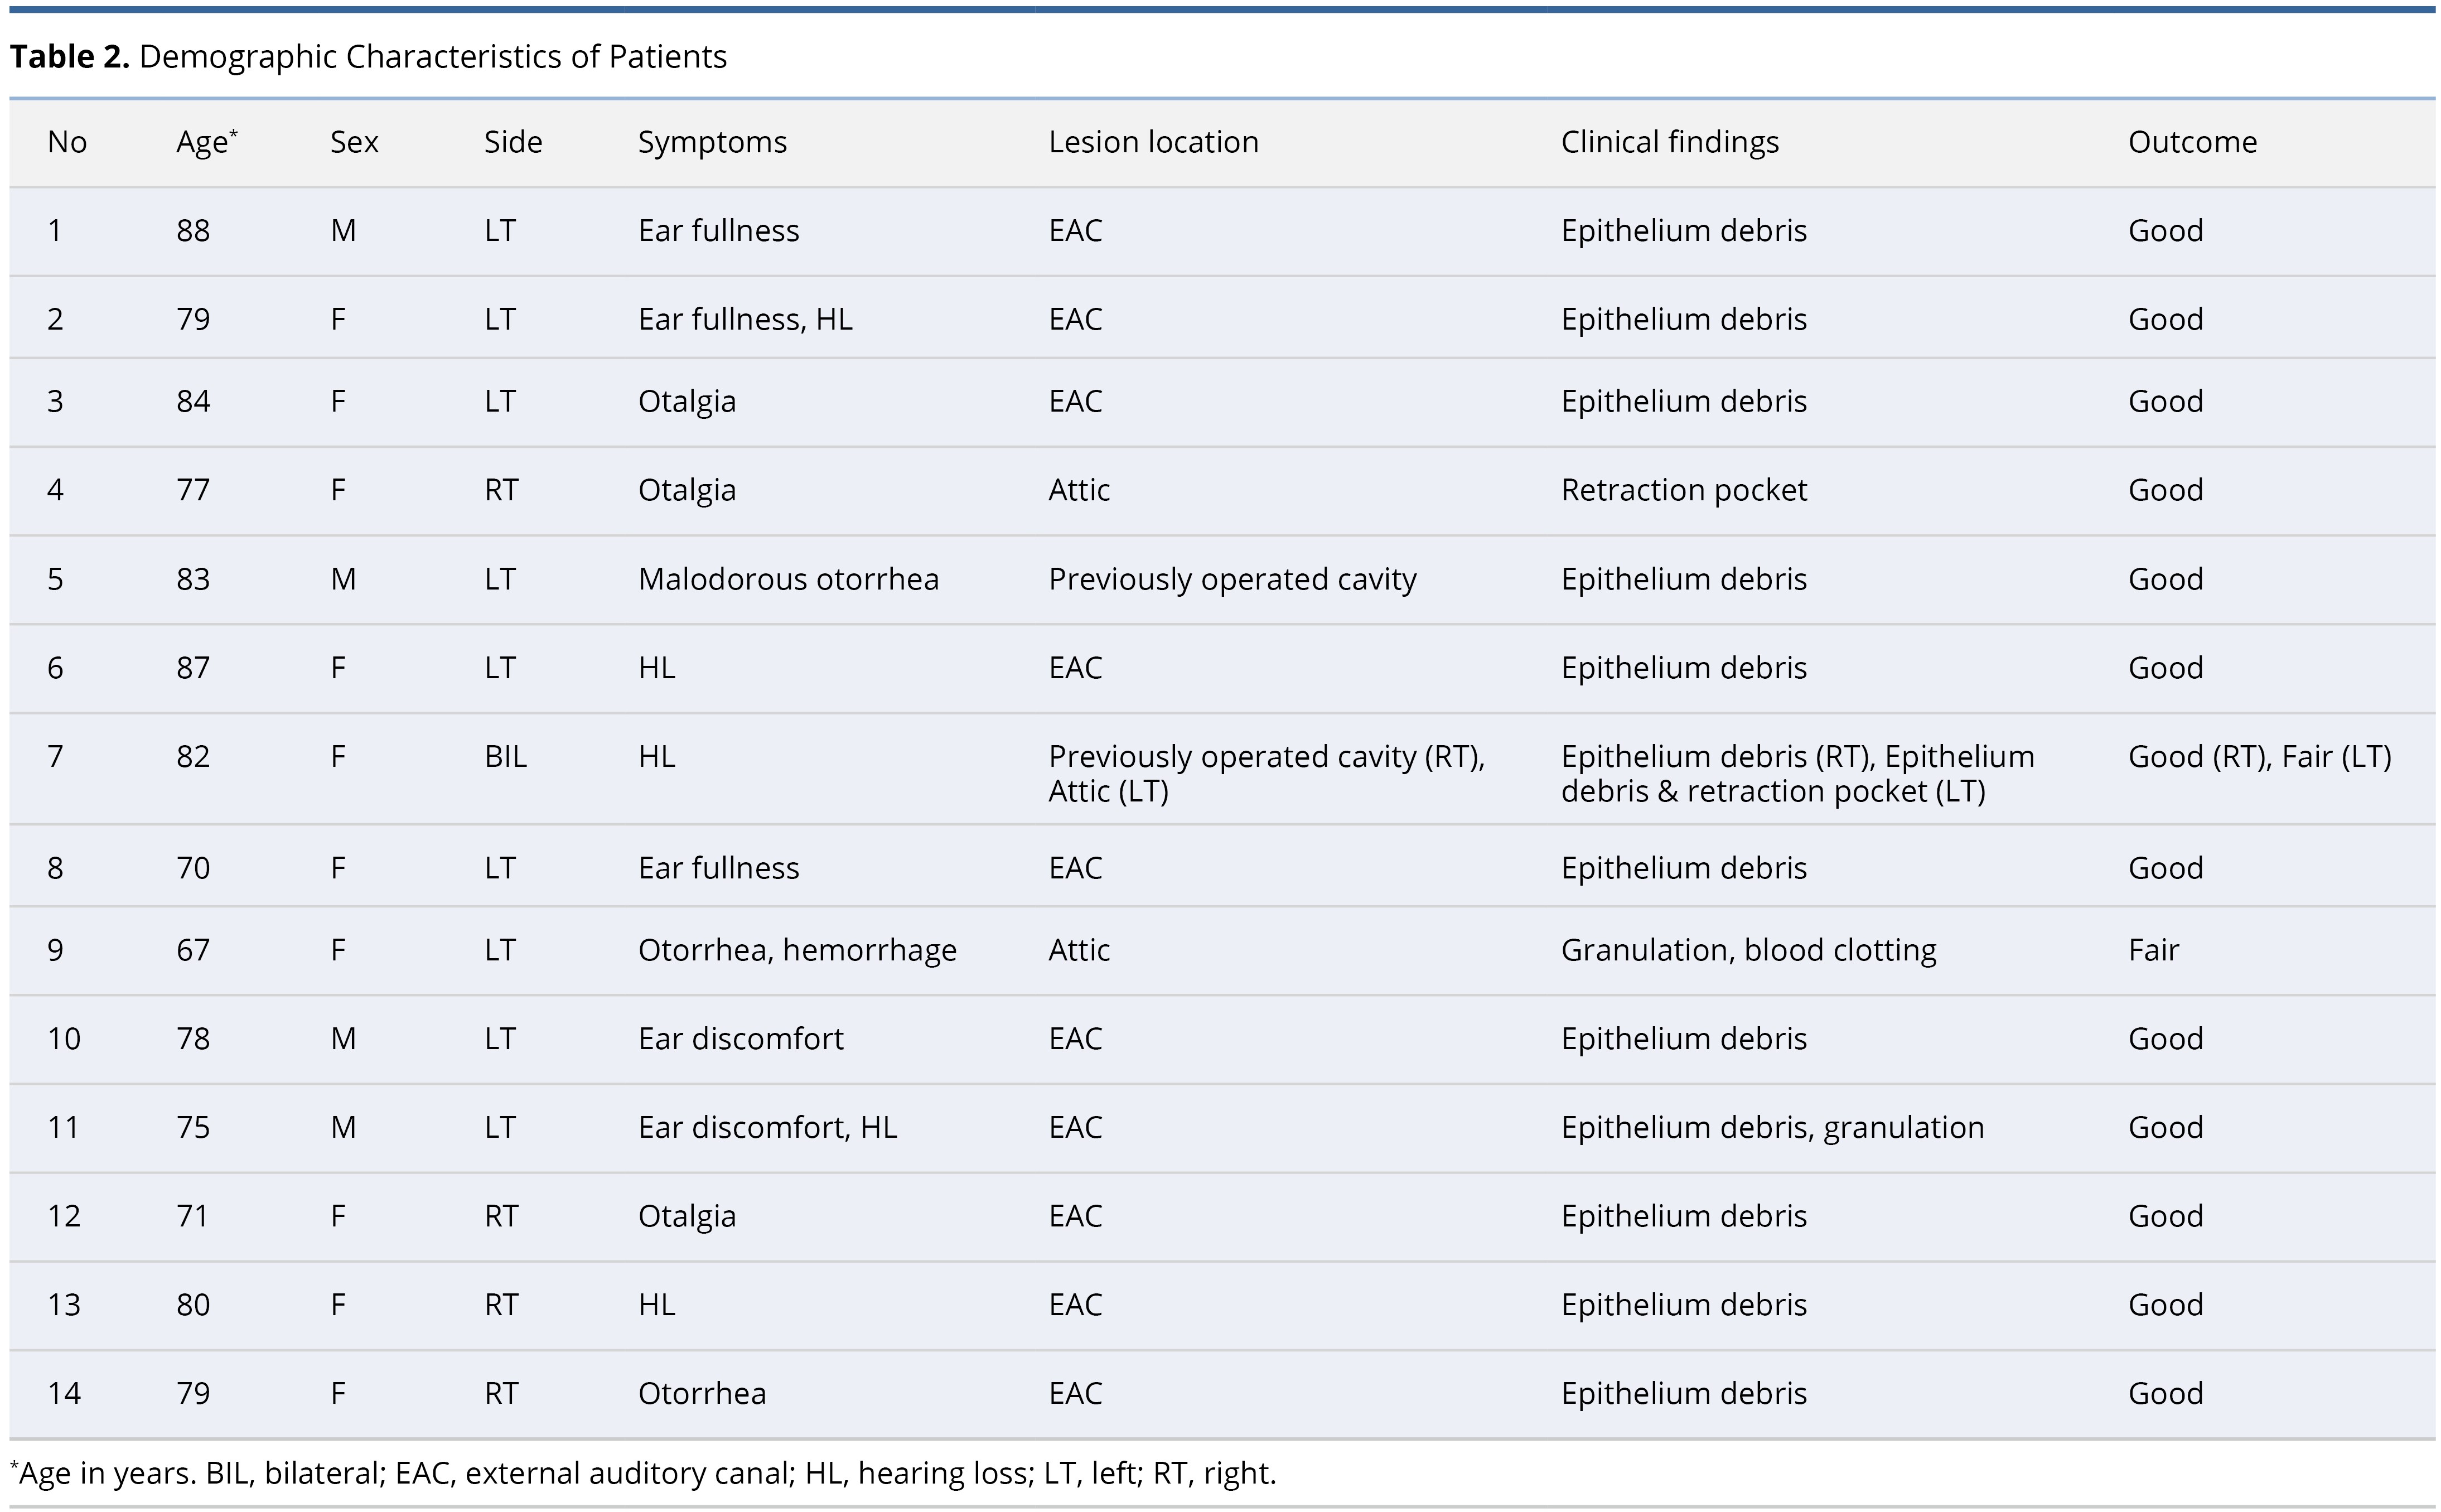 Table 2.jpgDemographic Characteristics of Patients